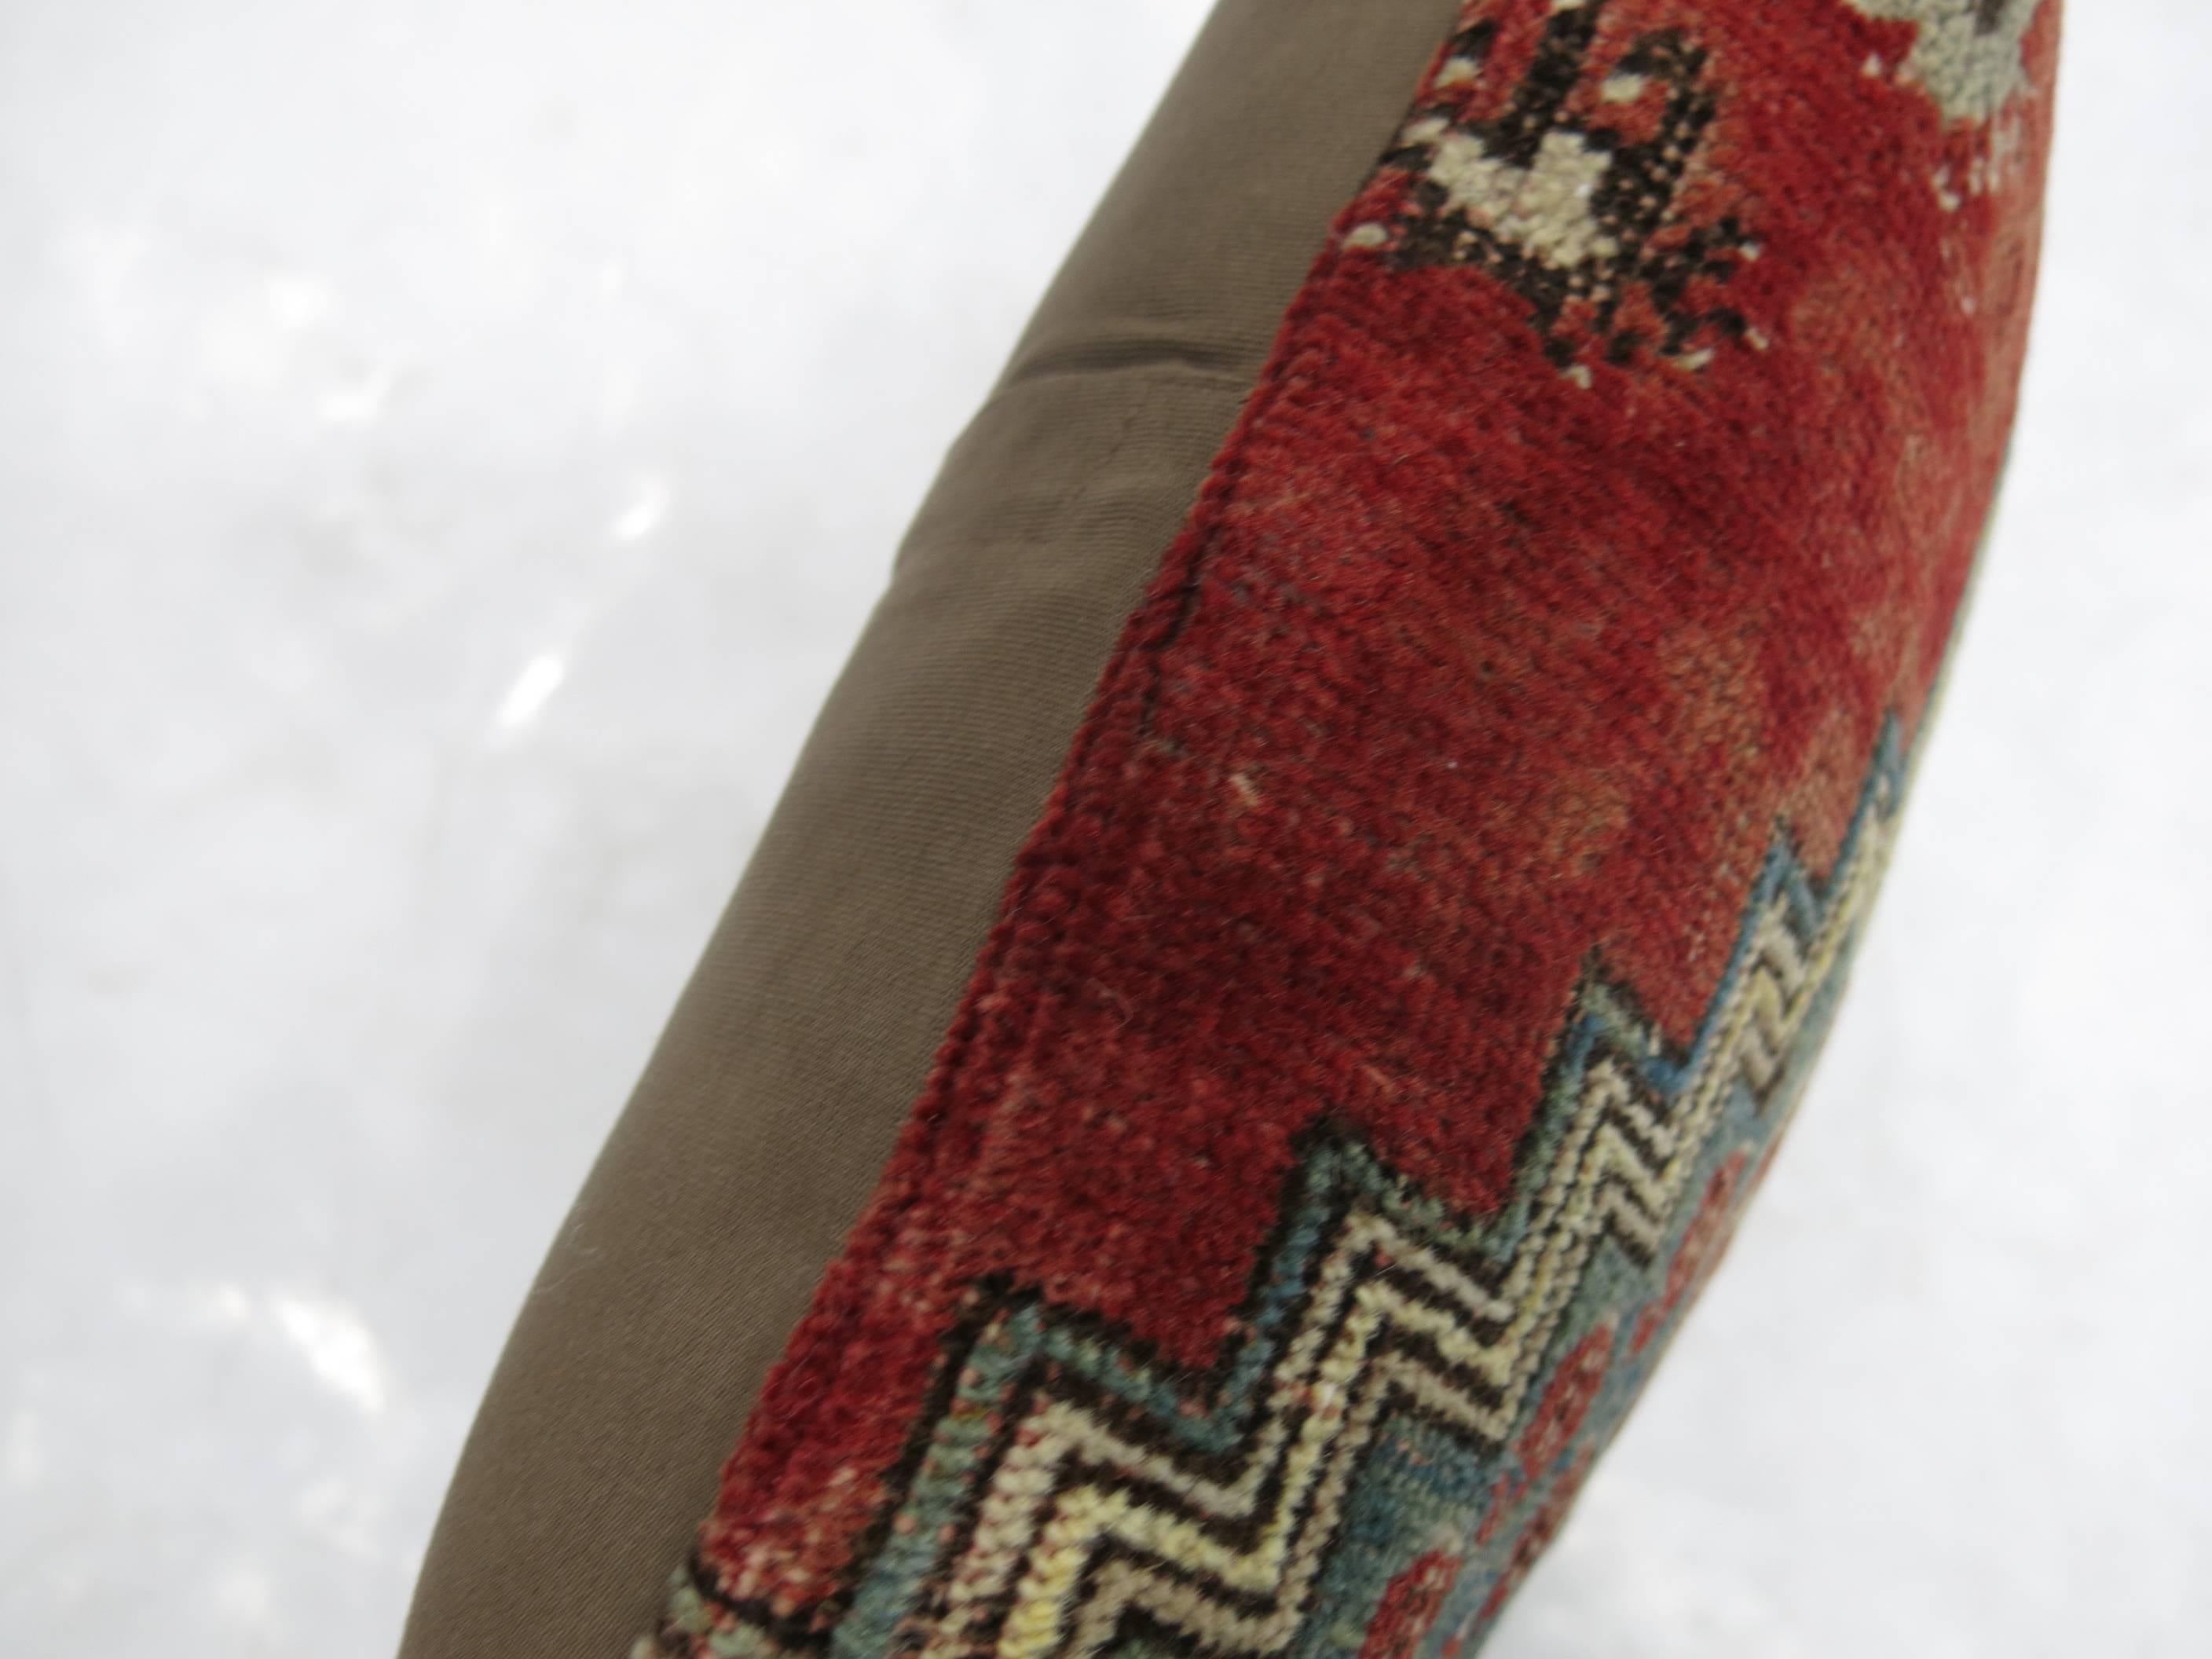 Pillow made from a vintage Turkish rug in reds and blues

15'' x 19''